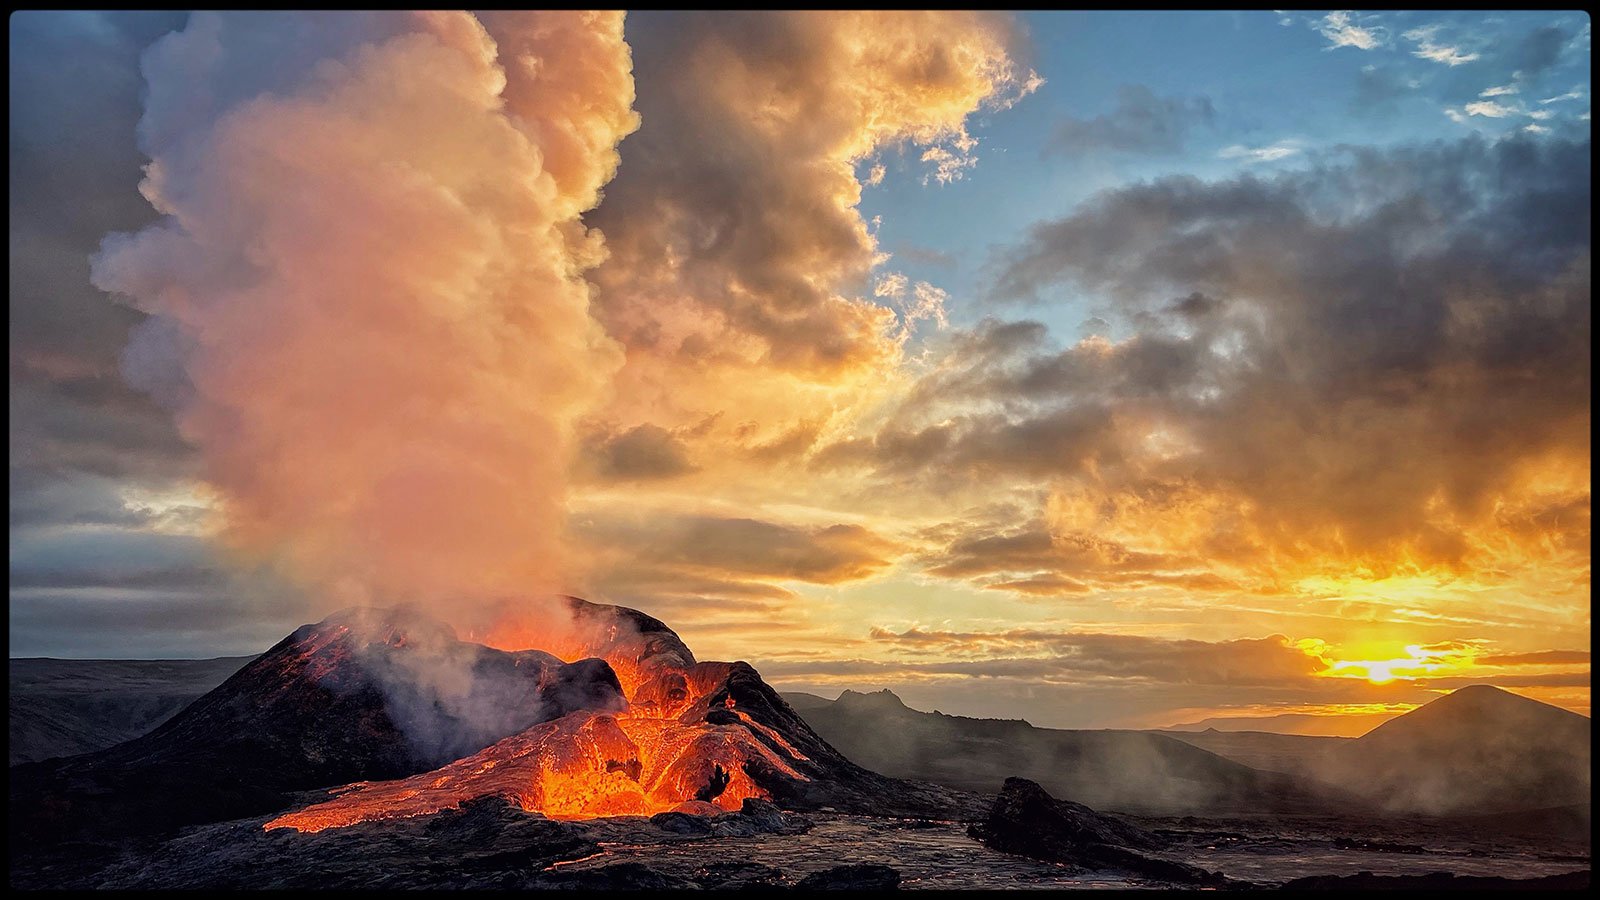 A volcano erupting with a bright orange sunrise in the distance